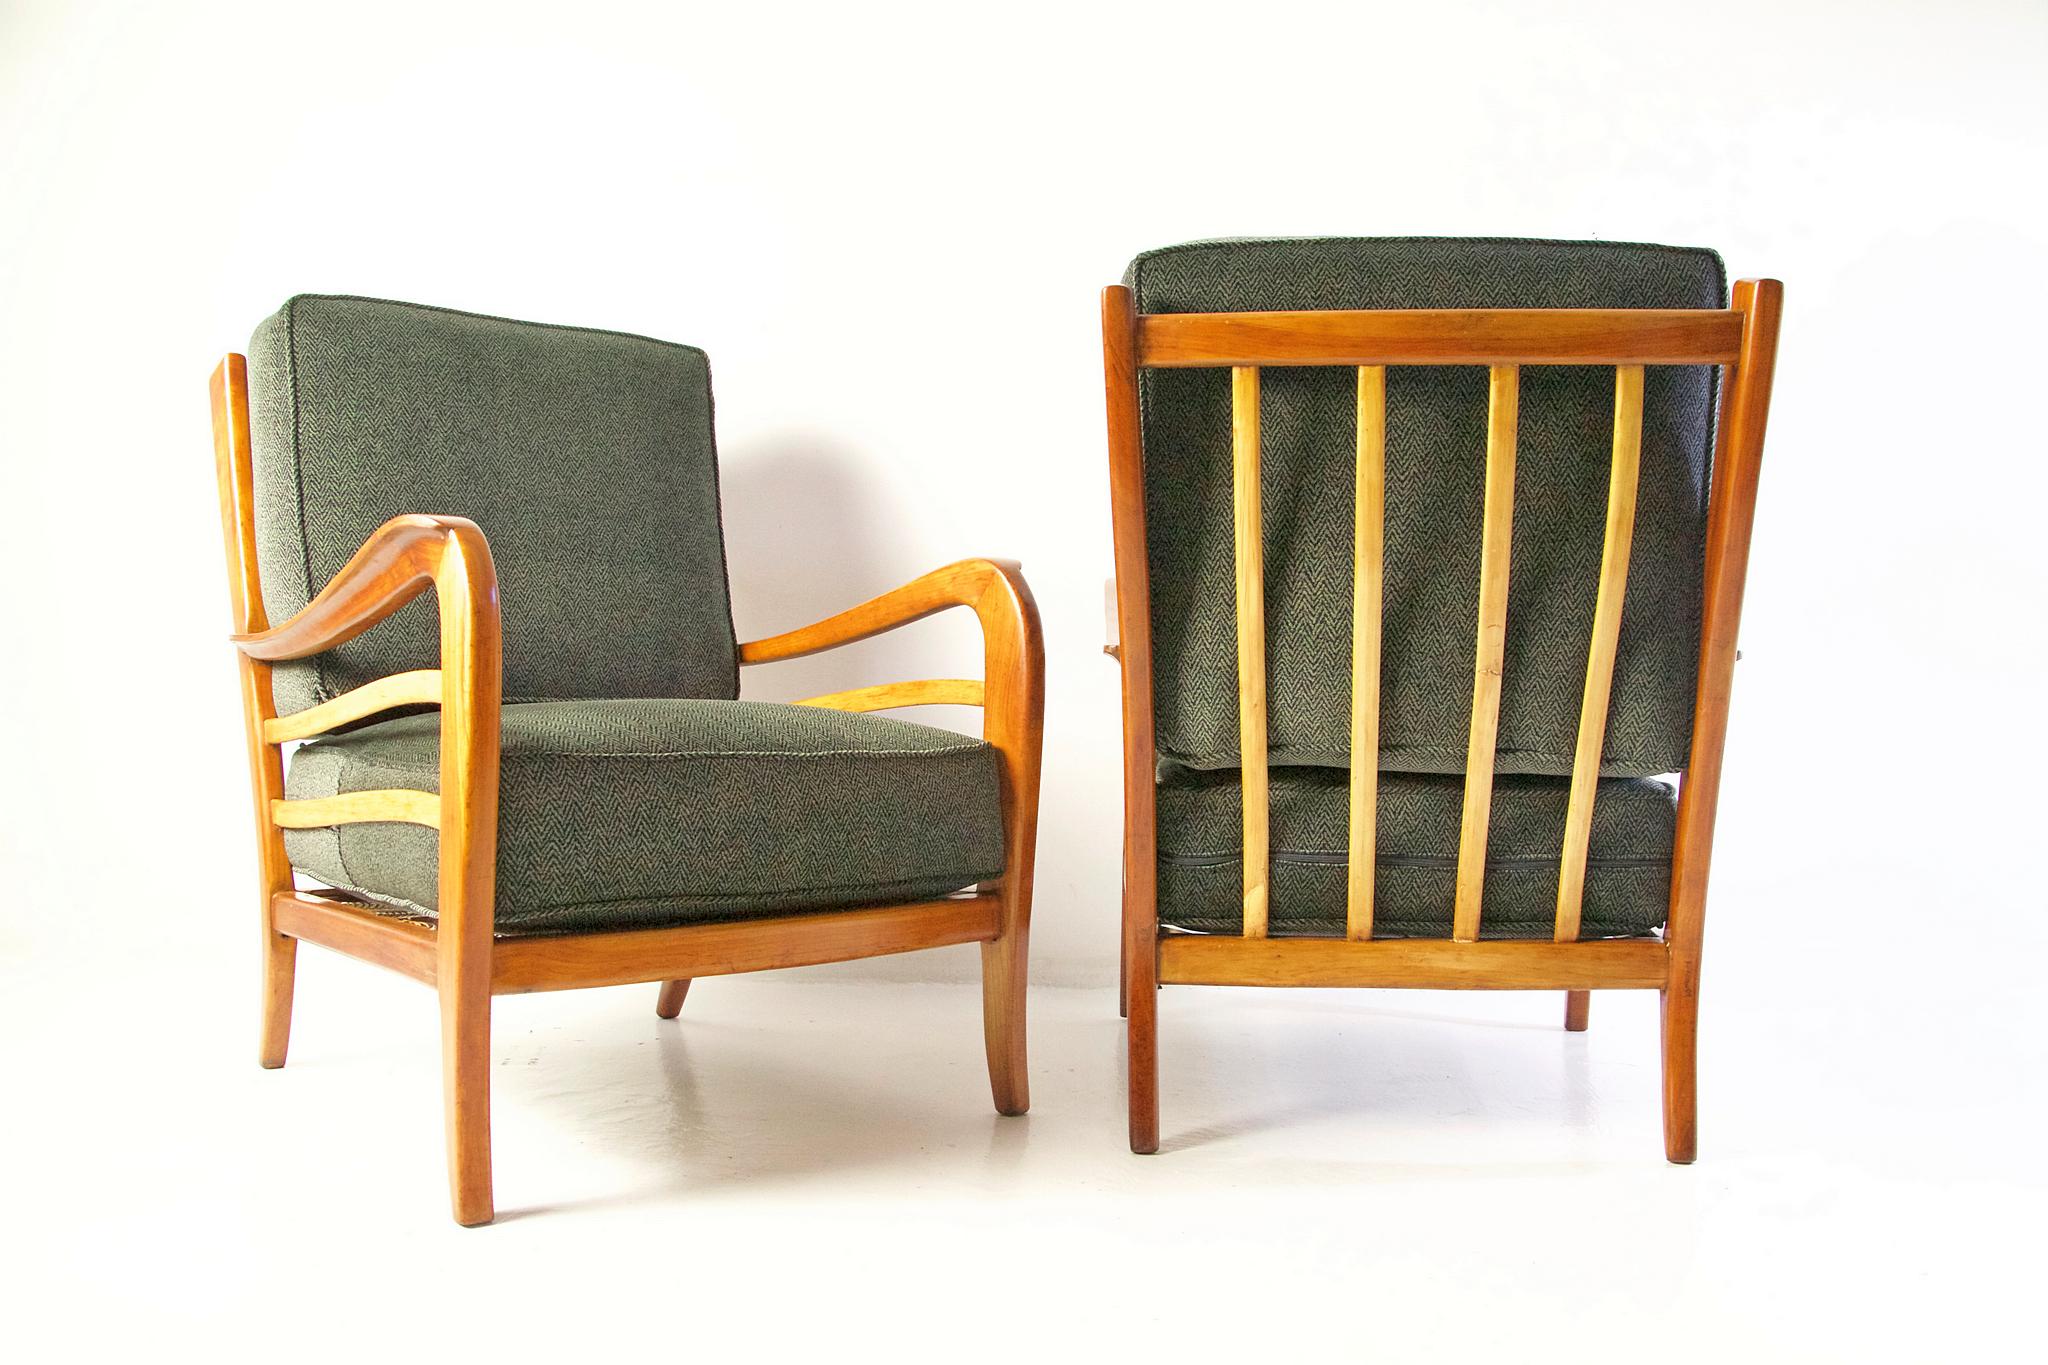 Pair of armchairs by Paolo Buffa, Italy with a wood frame in cherry and maple and reupholstered in Italian high quality upholstery velvet. The entire chair has been refinished in the wood as well.
Paolo Buffa is an Italian designer and architect.